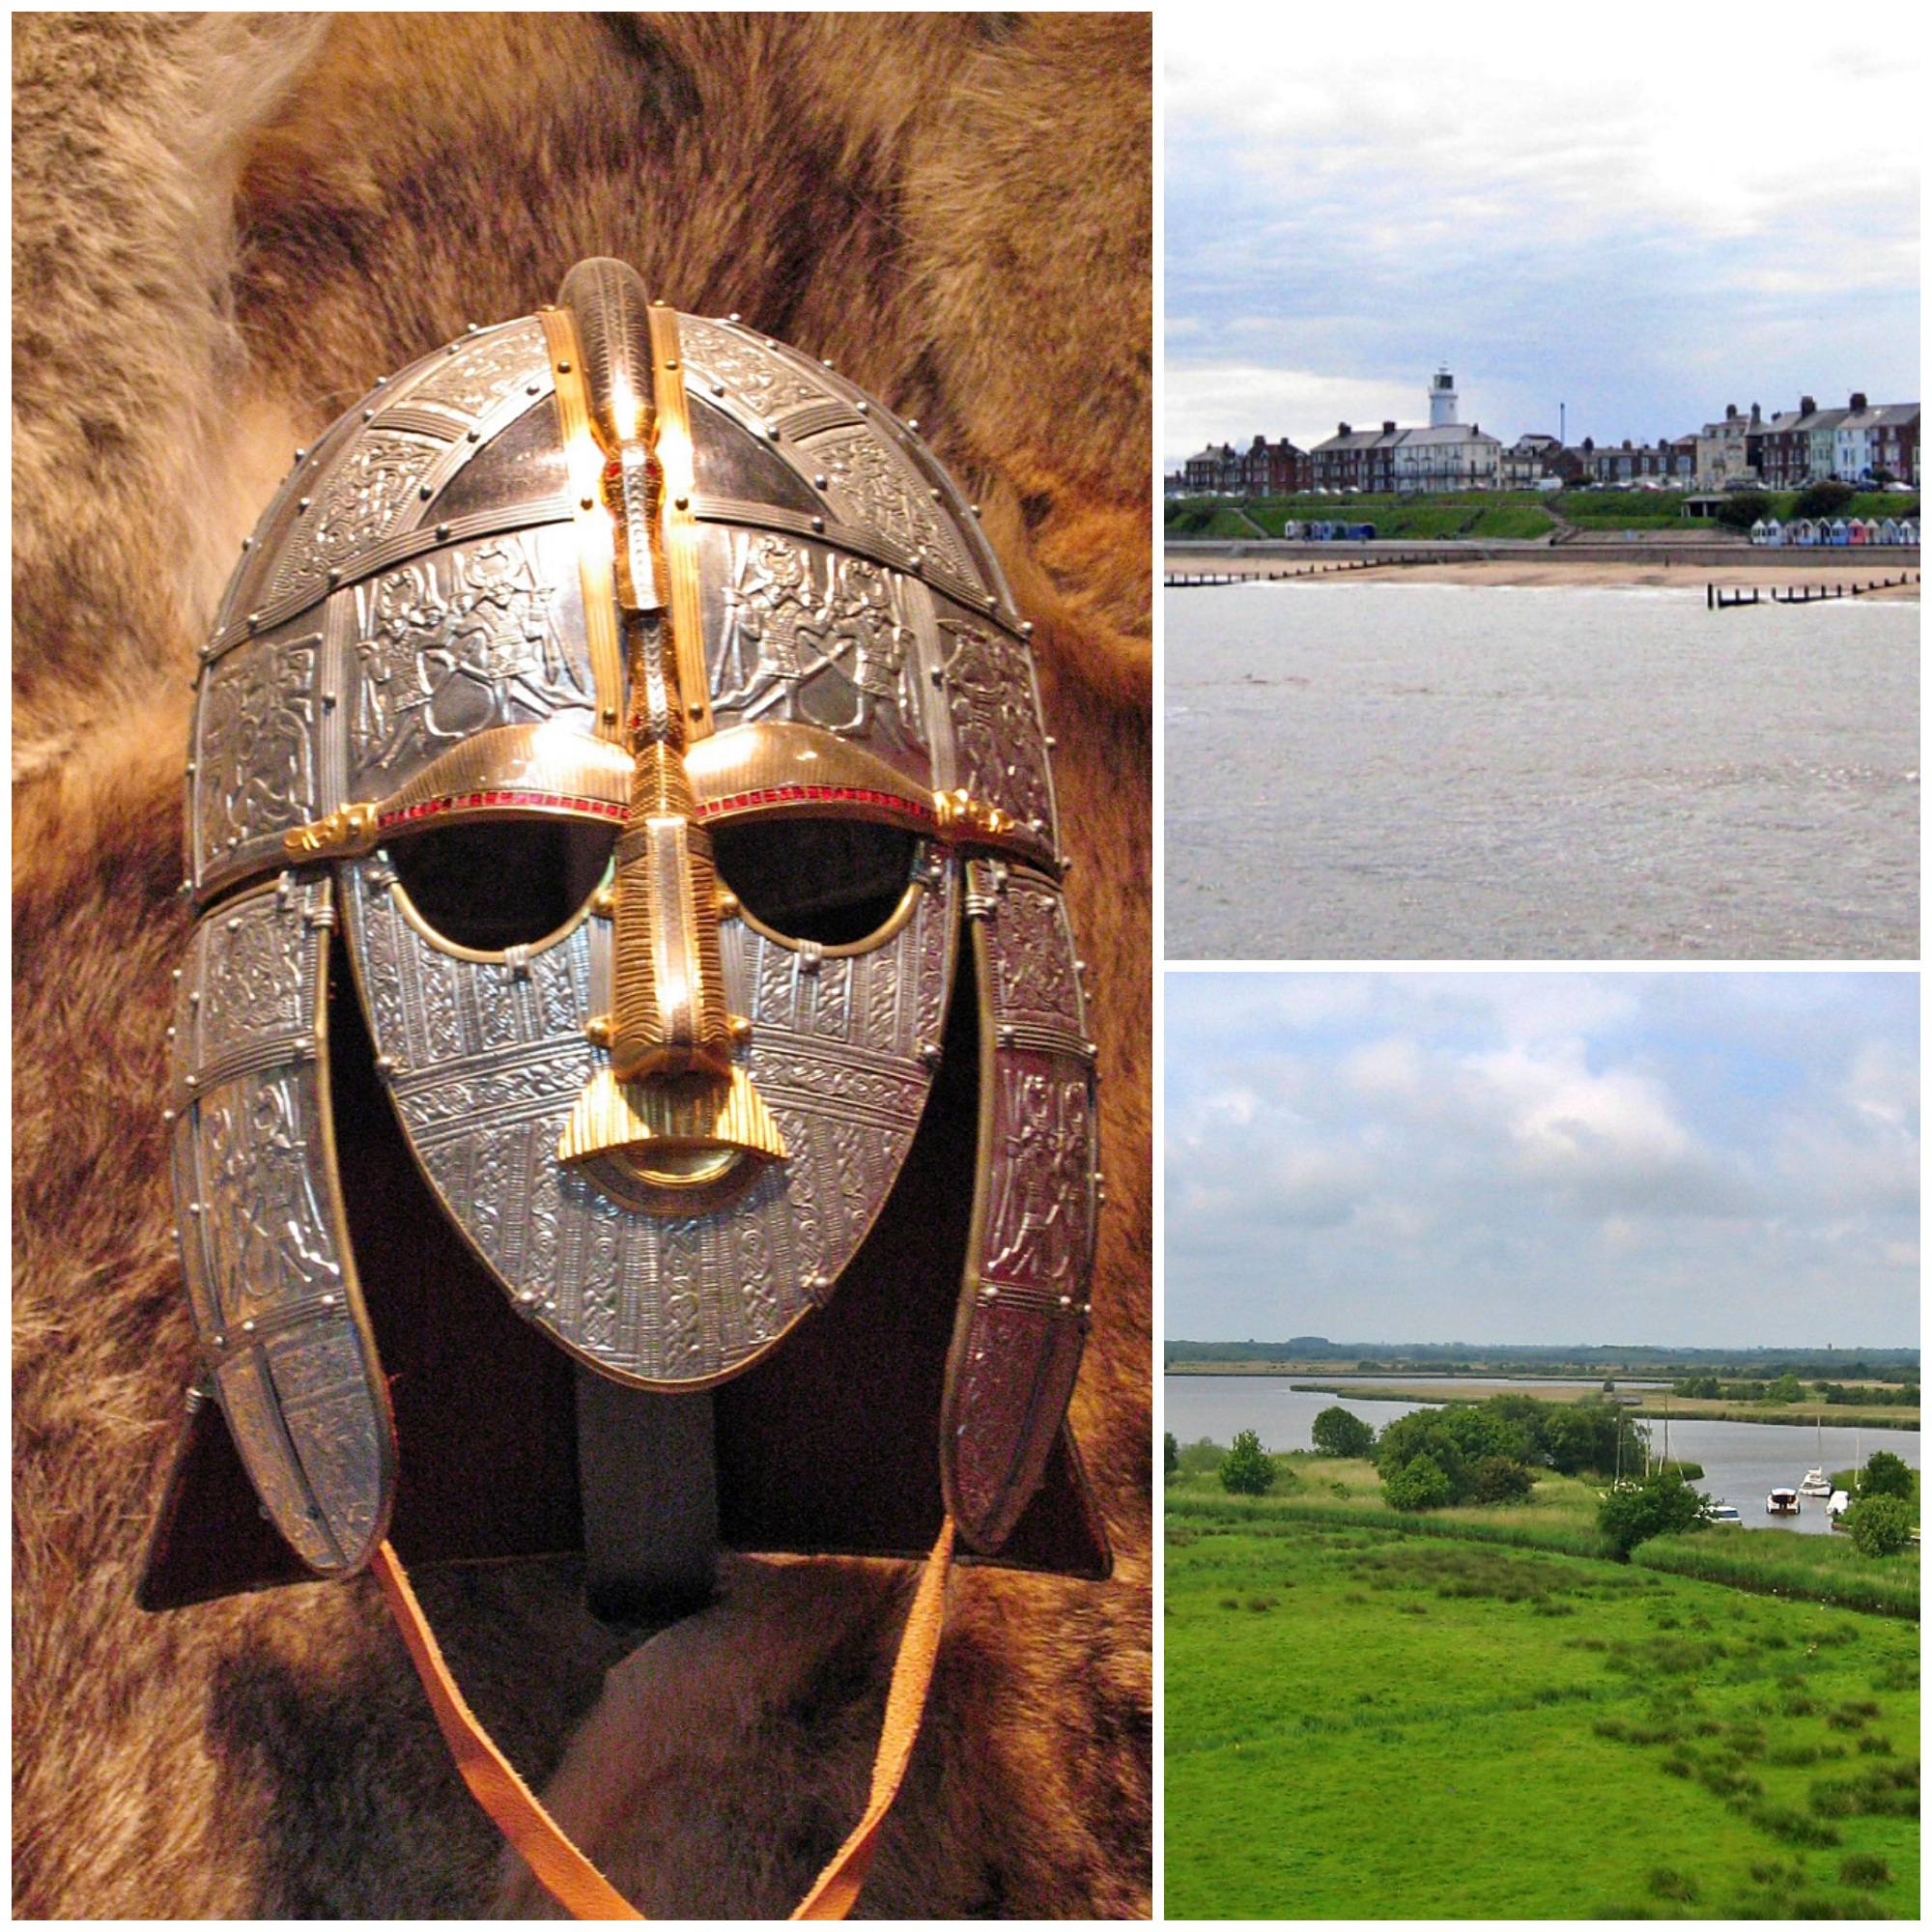 Sutton Hoo Anglo-Saxon Burial Site, Southwold, and The Norfolk Broads are all Close to Pakefield Holiday Park